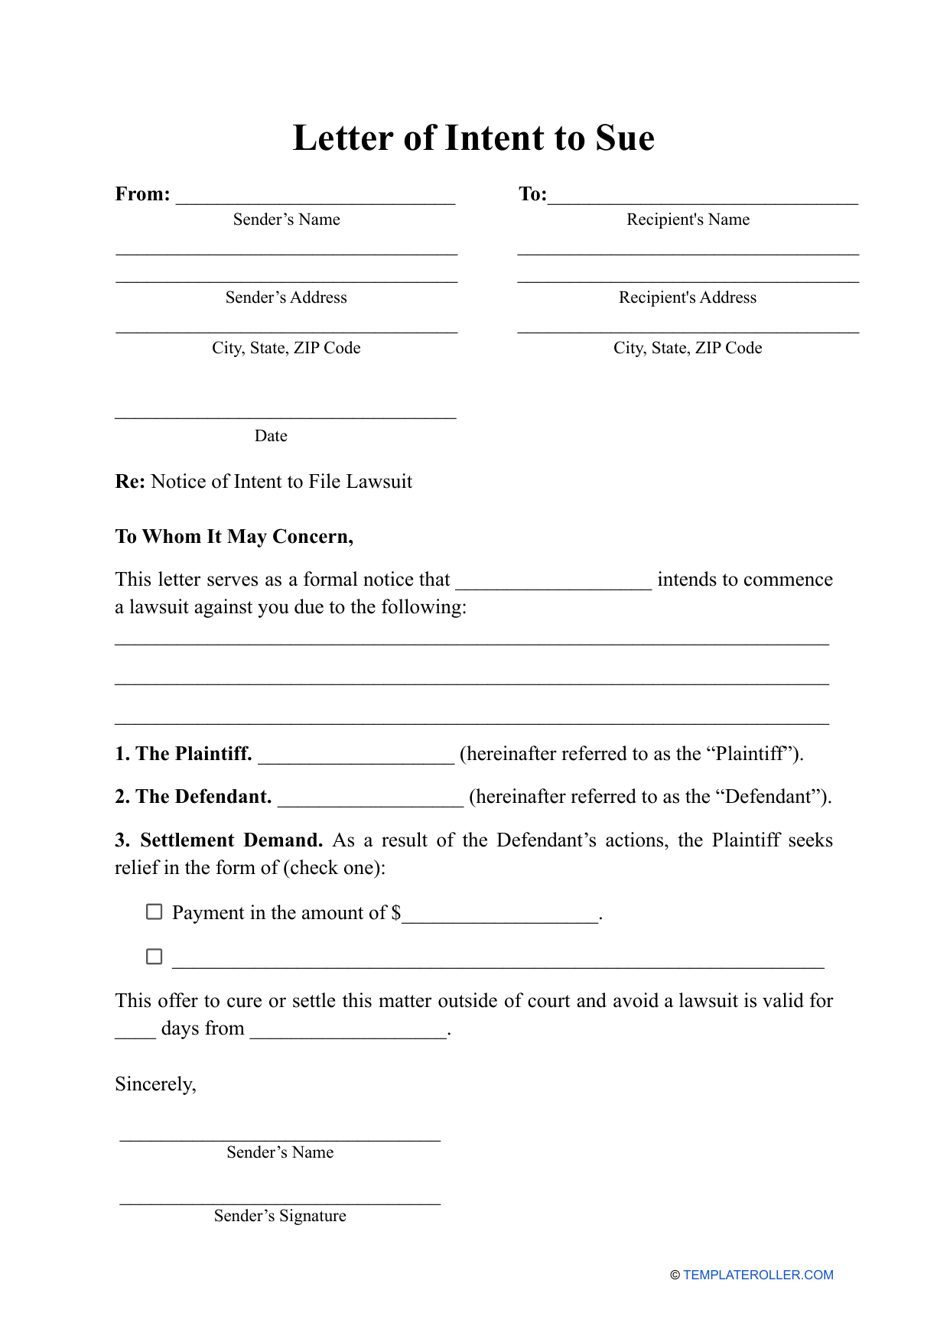 letter-of-intent-to-sue-template-download-printable-pdf-templateroller